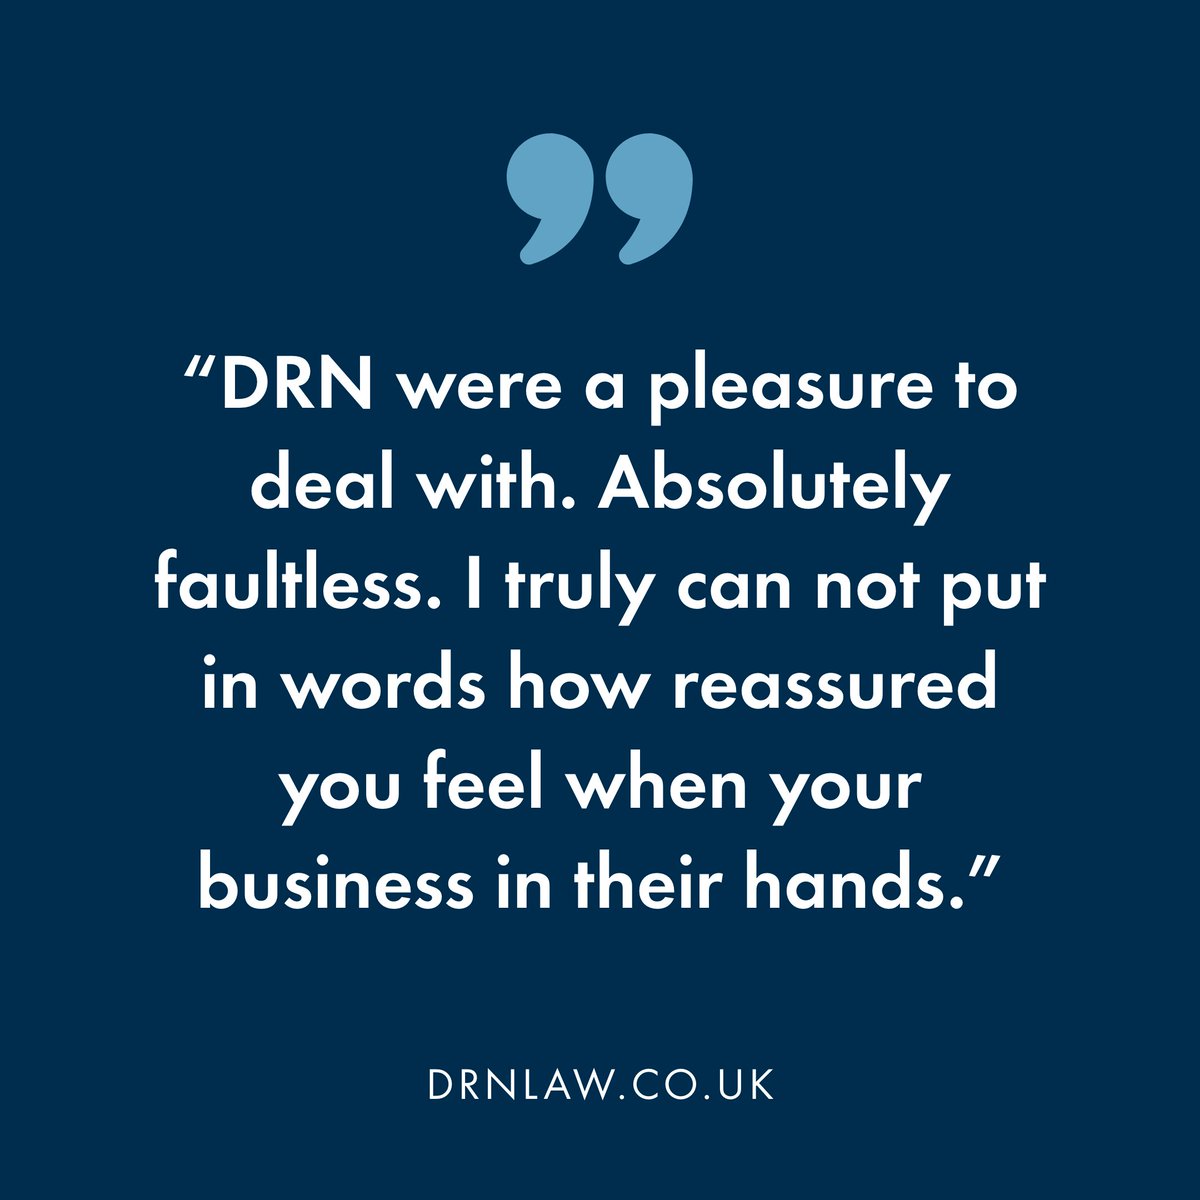 Fantastic Feedback 🌟 We offer a full range of legal services and have a team of highly qualified and experienced lawyers who are specialists in their field. Do you have a spare couple of minutes? We'd love to hear your feedback 👉bit.ly/46oqCQj #solicitors